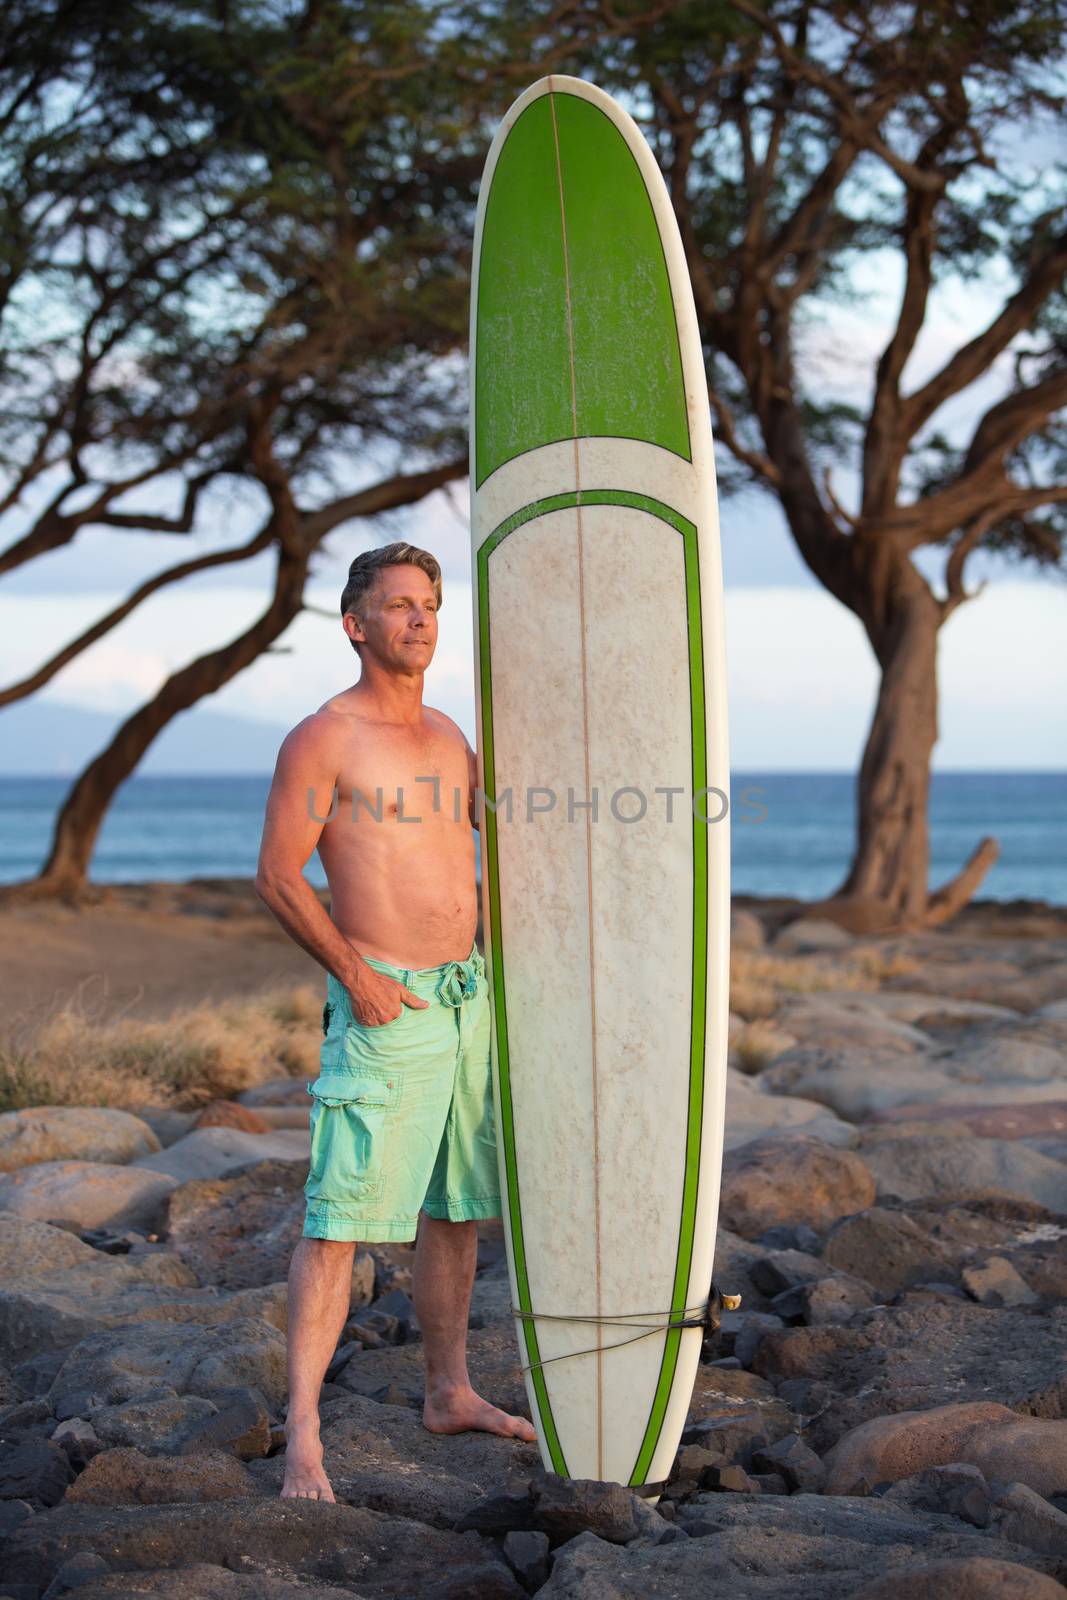 Single adult surfer posing with surfboard outdoors